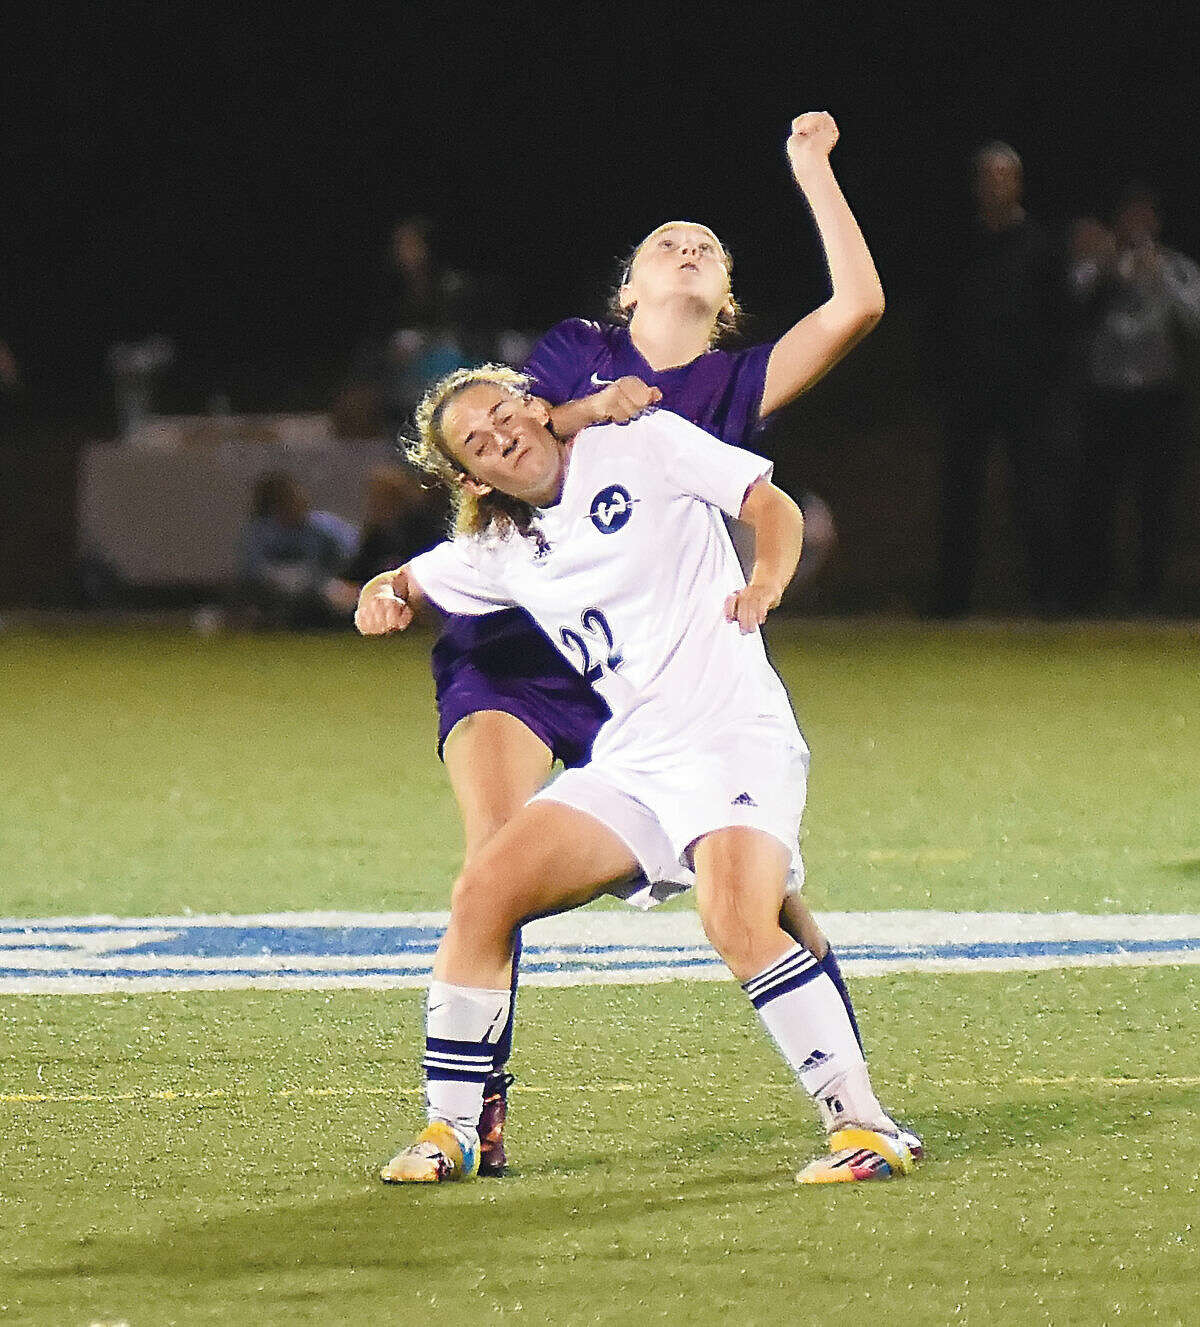 Hour photo/John Nash - Wilton's Rebecca Hersch, front, gets physical with a Westhill player as the two wait to play a head ball during Thursday's FCIAC girls soccer game at Kristine Lilly Field in Wilton.